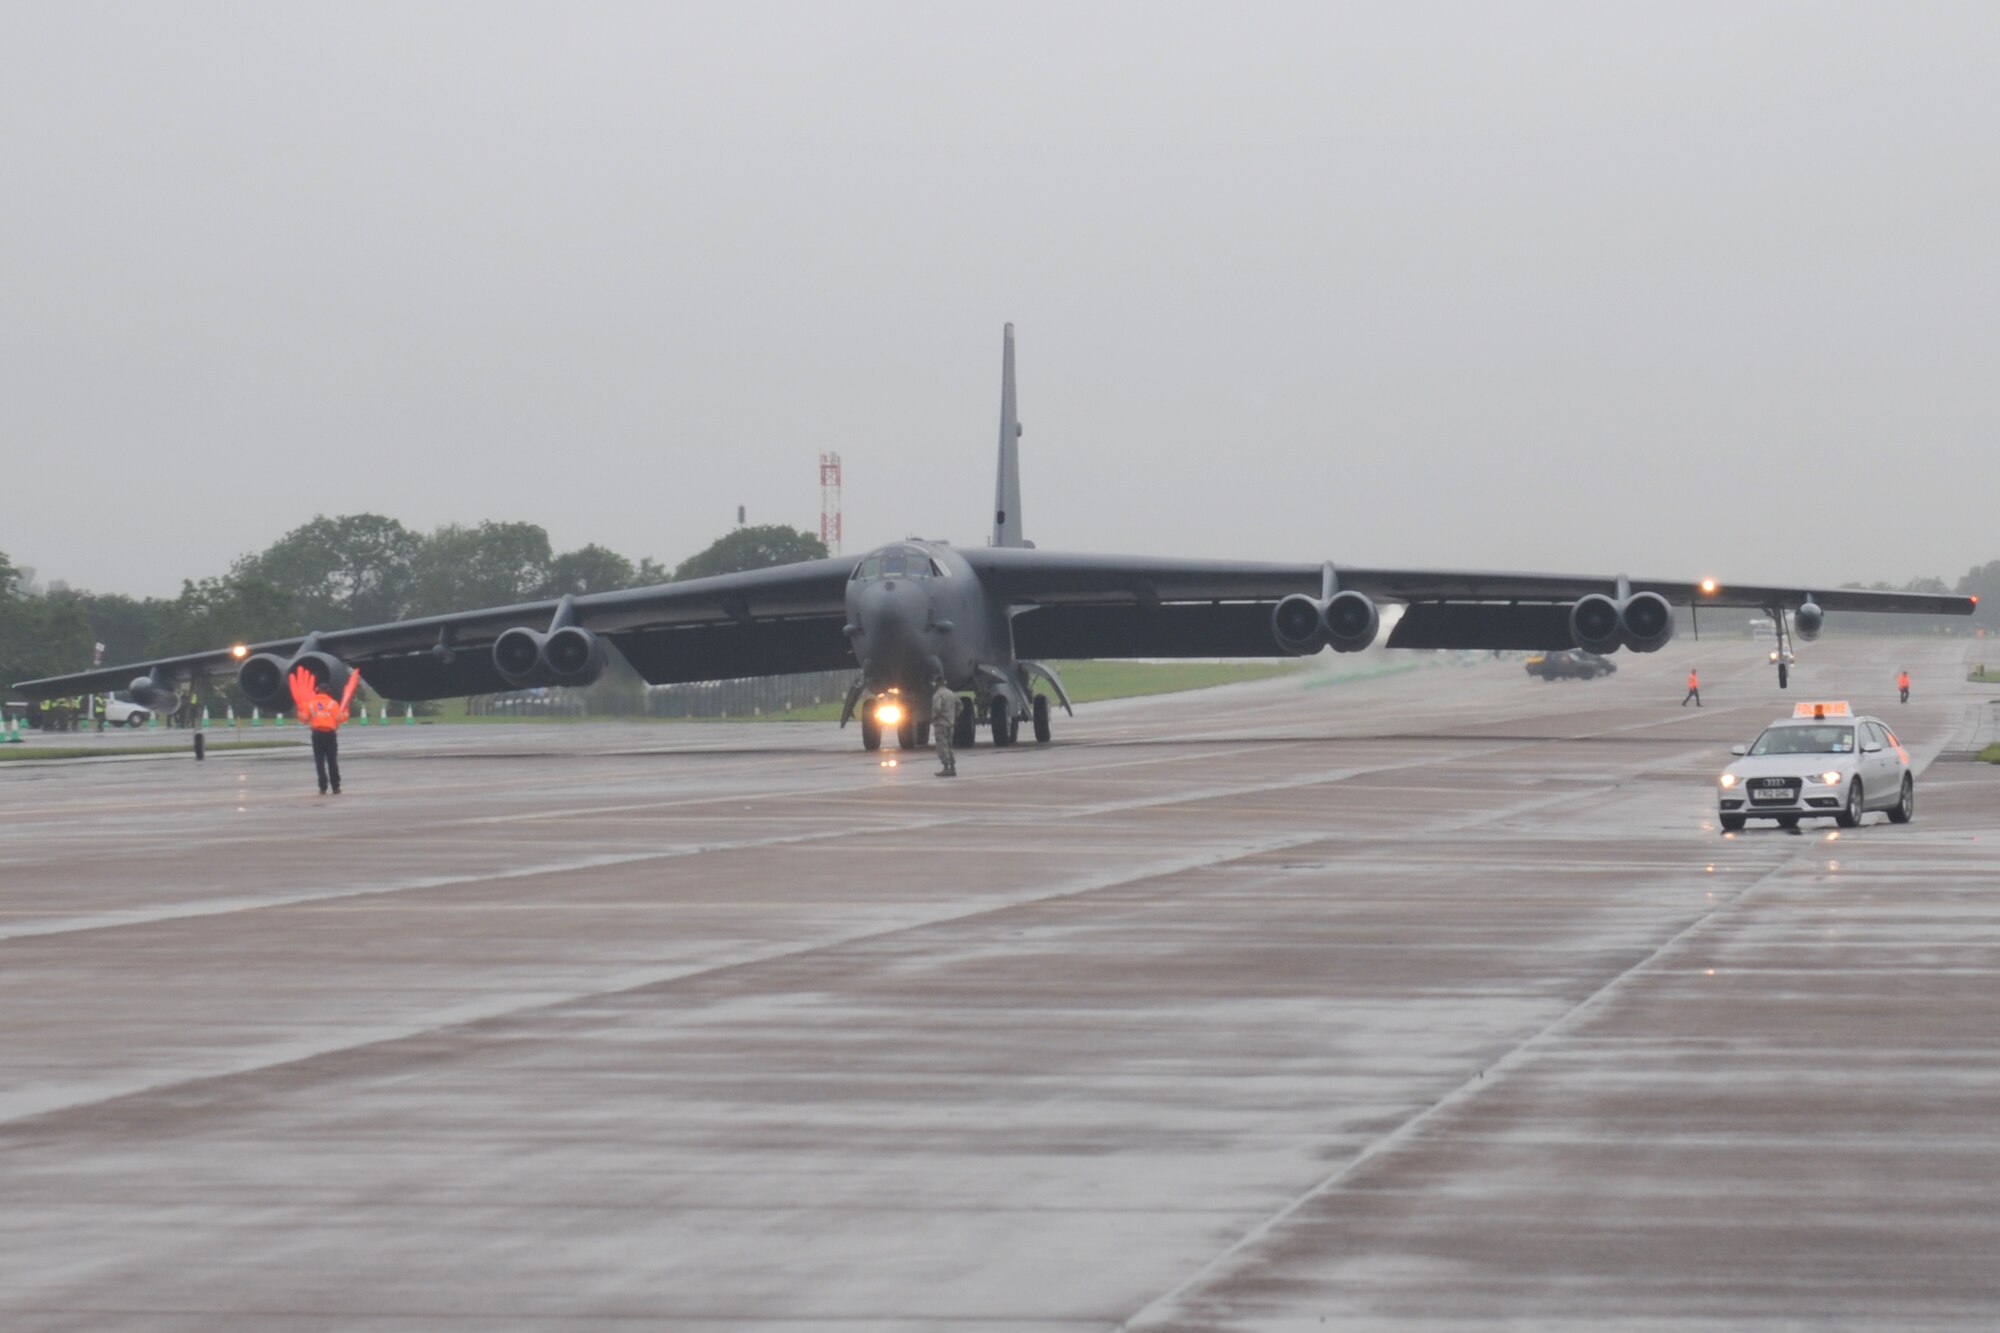 RAF FAIRFORD, United Kingdom - A B-52 Stratofortress from Barksdale AFB, La., lands at the Royal International Air Tattoo July 4 here. (U.S. Air Force photo by Capt. Brian Maguire)